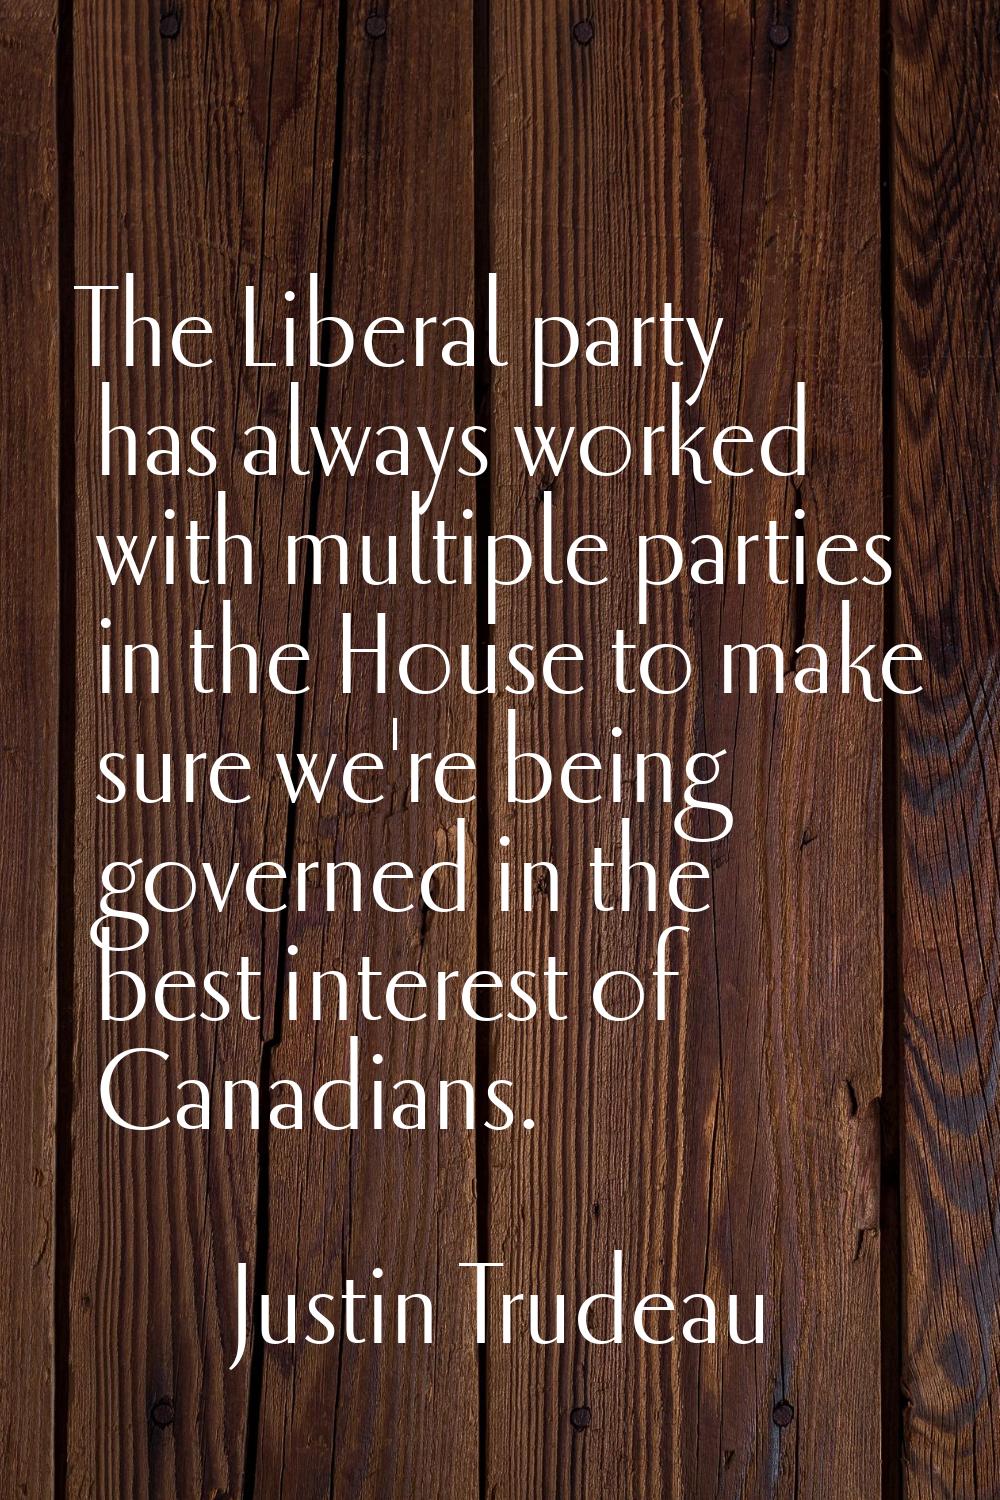 The Liberal party has always worked with multiple parties in the House to make sure we're being gov